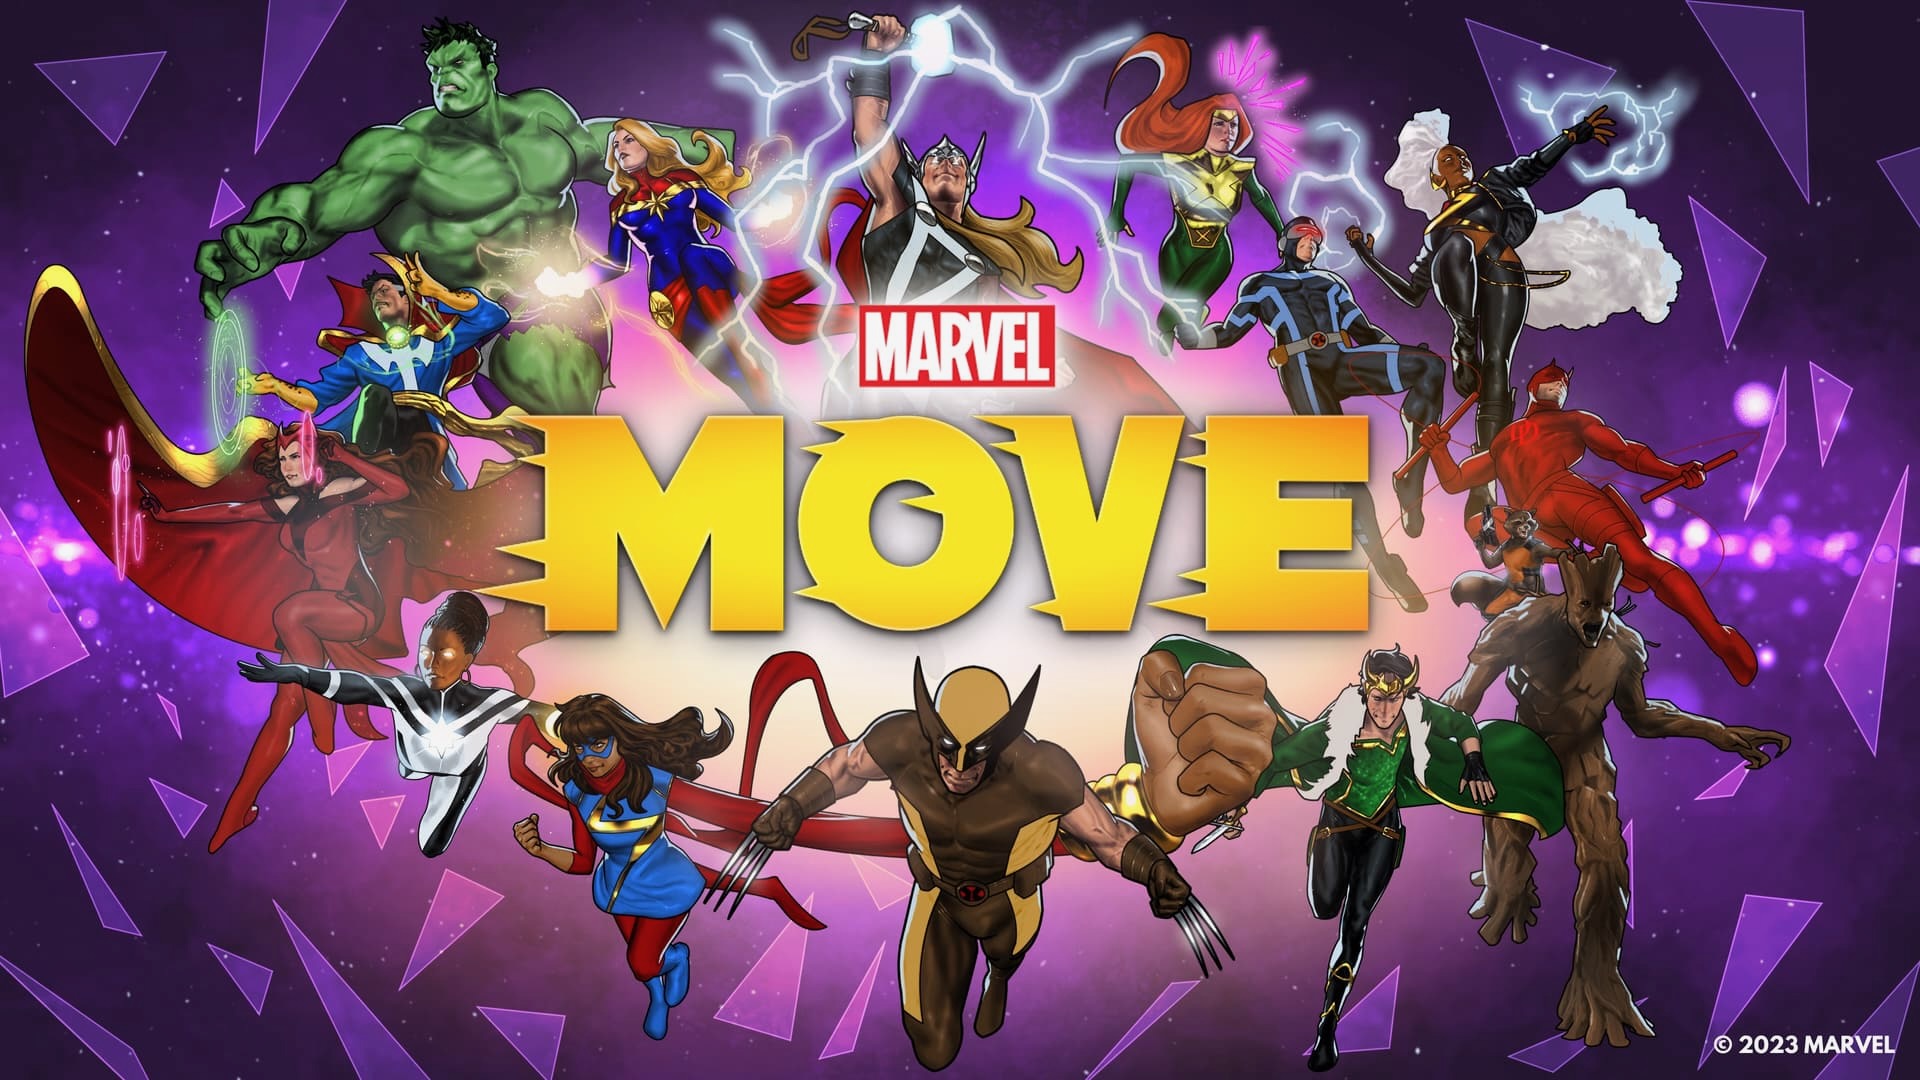 A promo image for ZRX's Marvel Move, showing famous Marvel heroes like Thor, the Hulk, Wolverine, Storm, Groot, Captain Marvel, Scarlet Witch, and Doctor Strange.